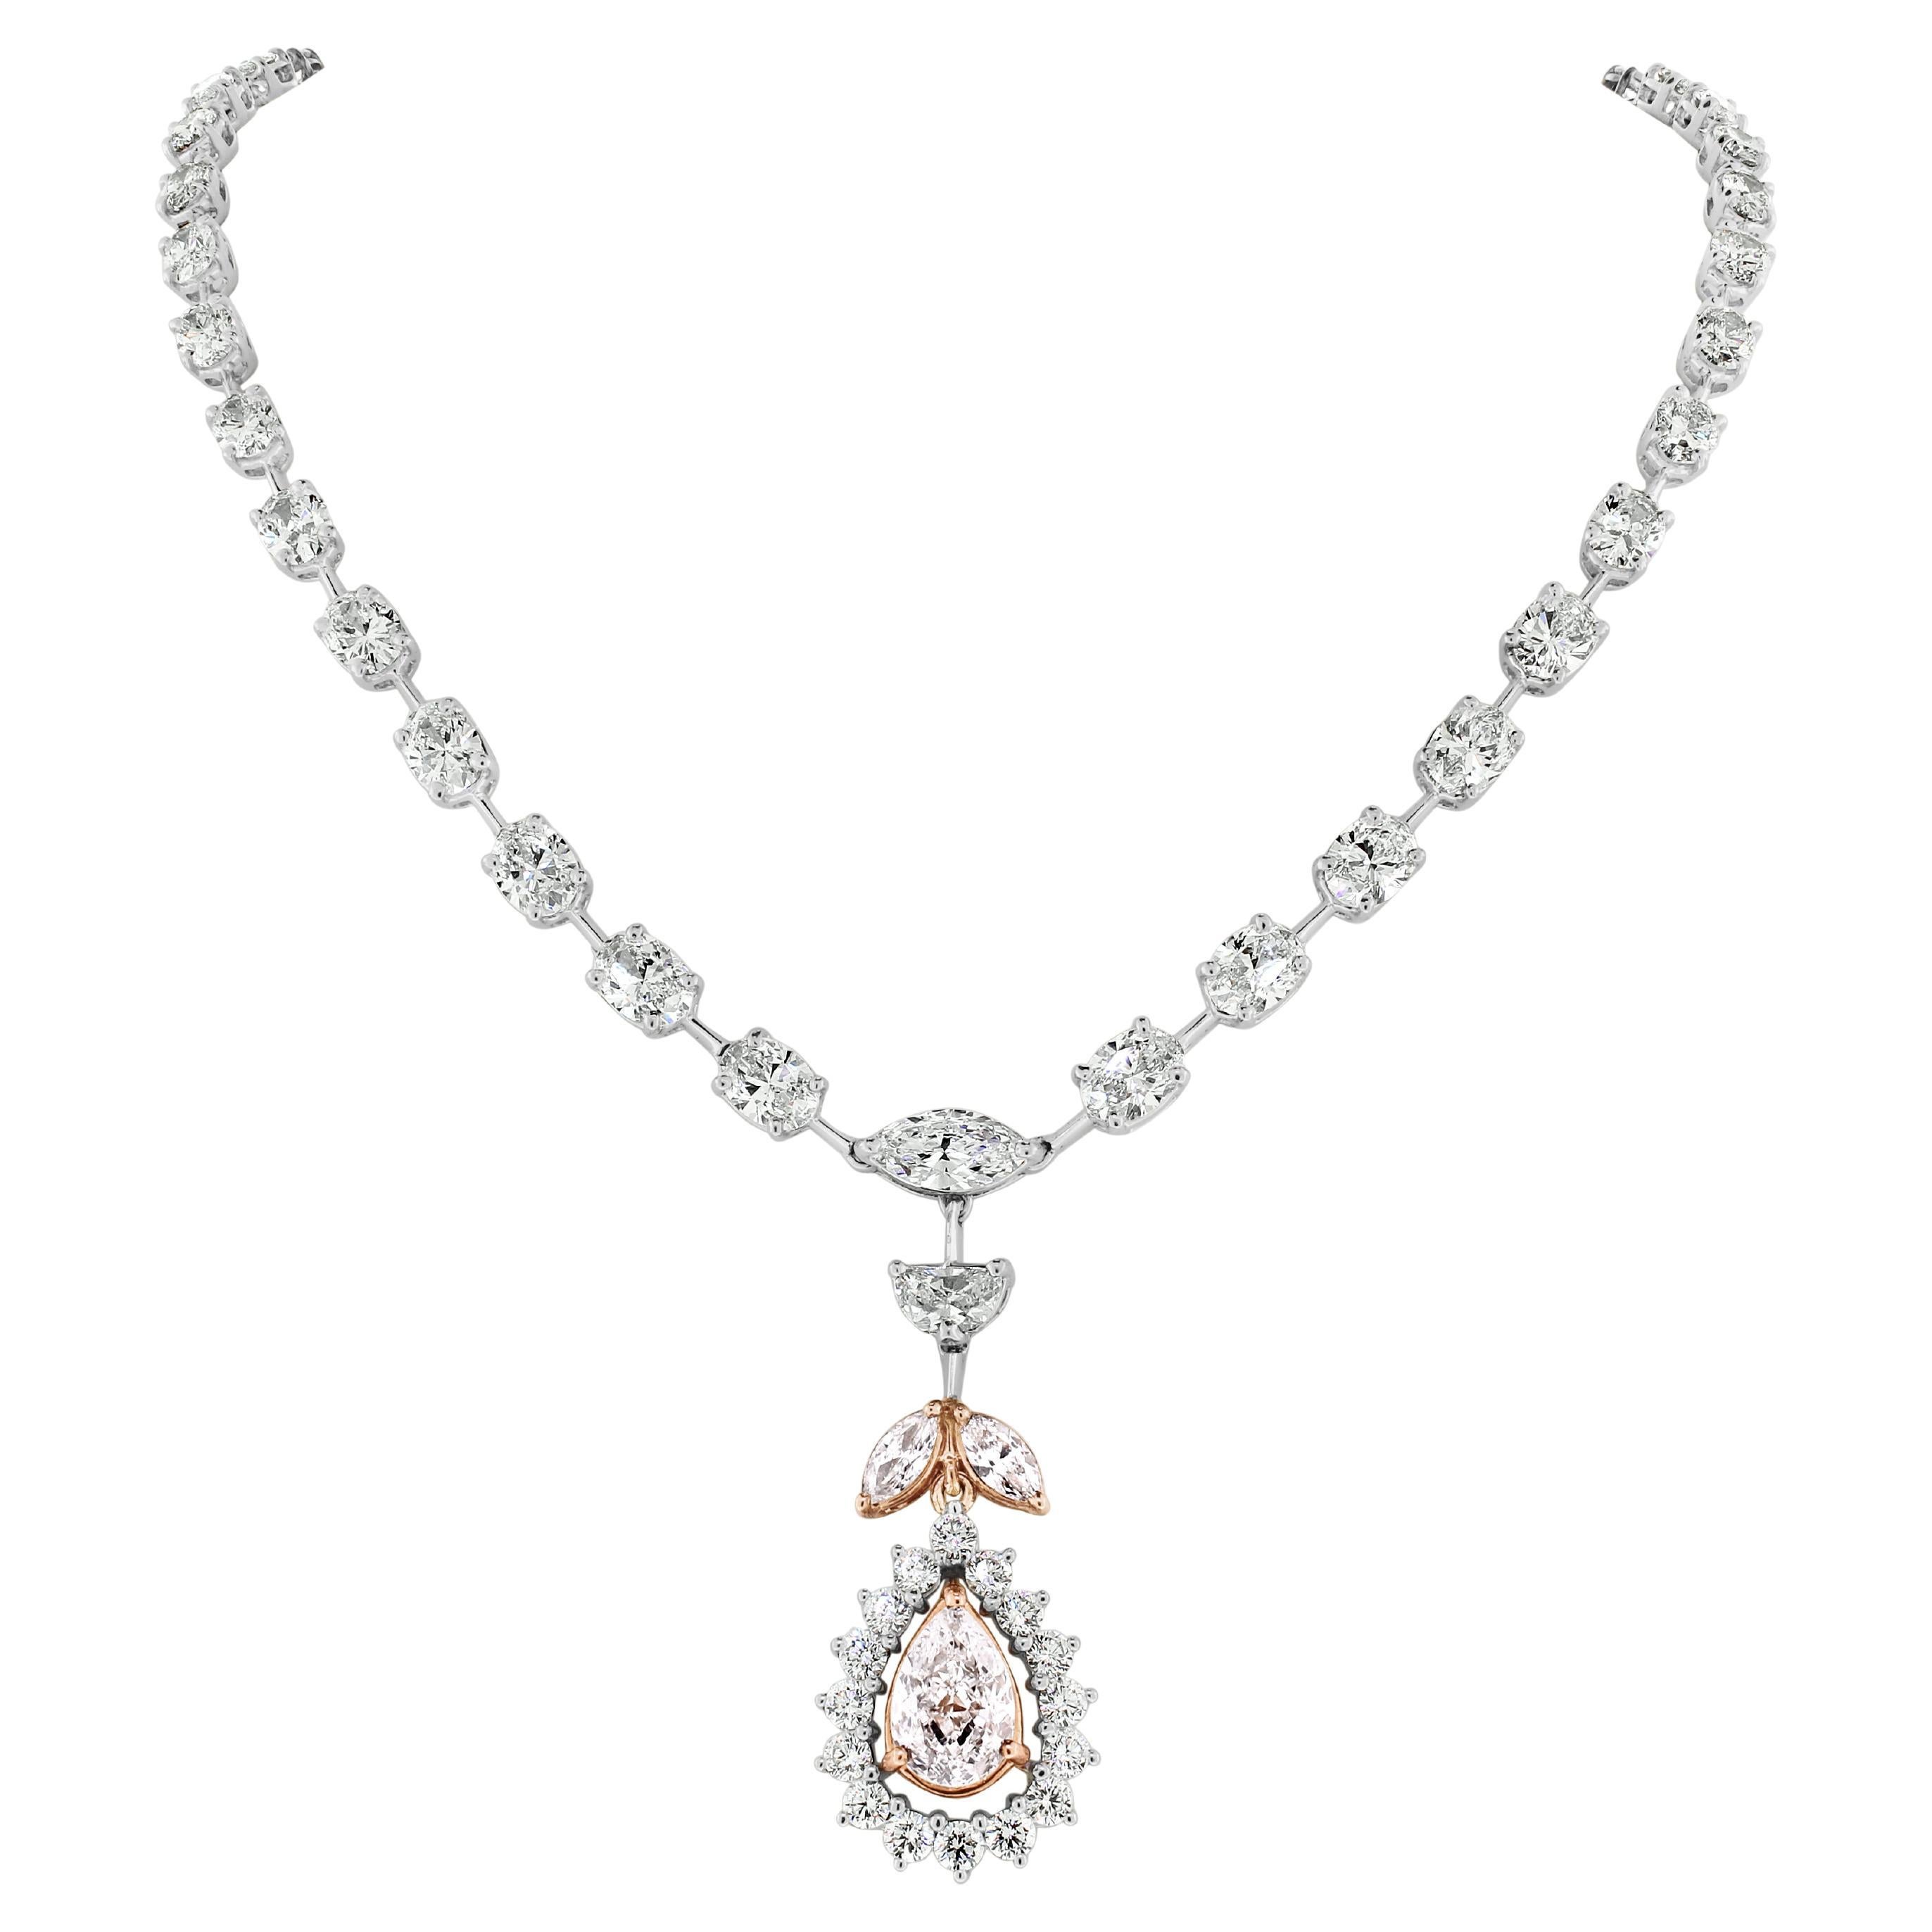 Beauvince Maira Diamond Necklace '19.26 ct Diamonds' in Gold For Sale